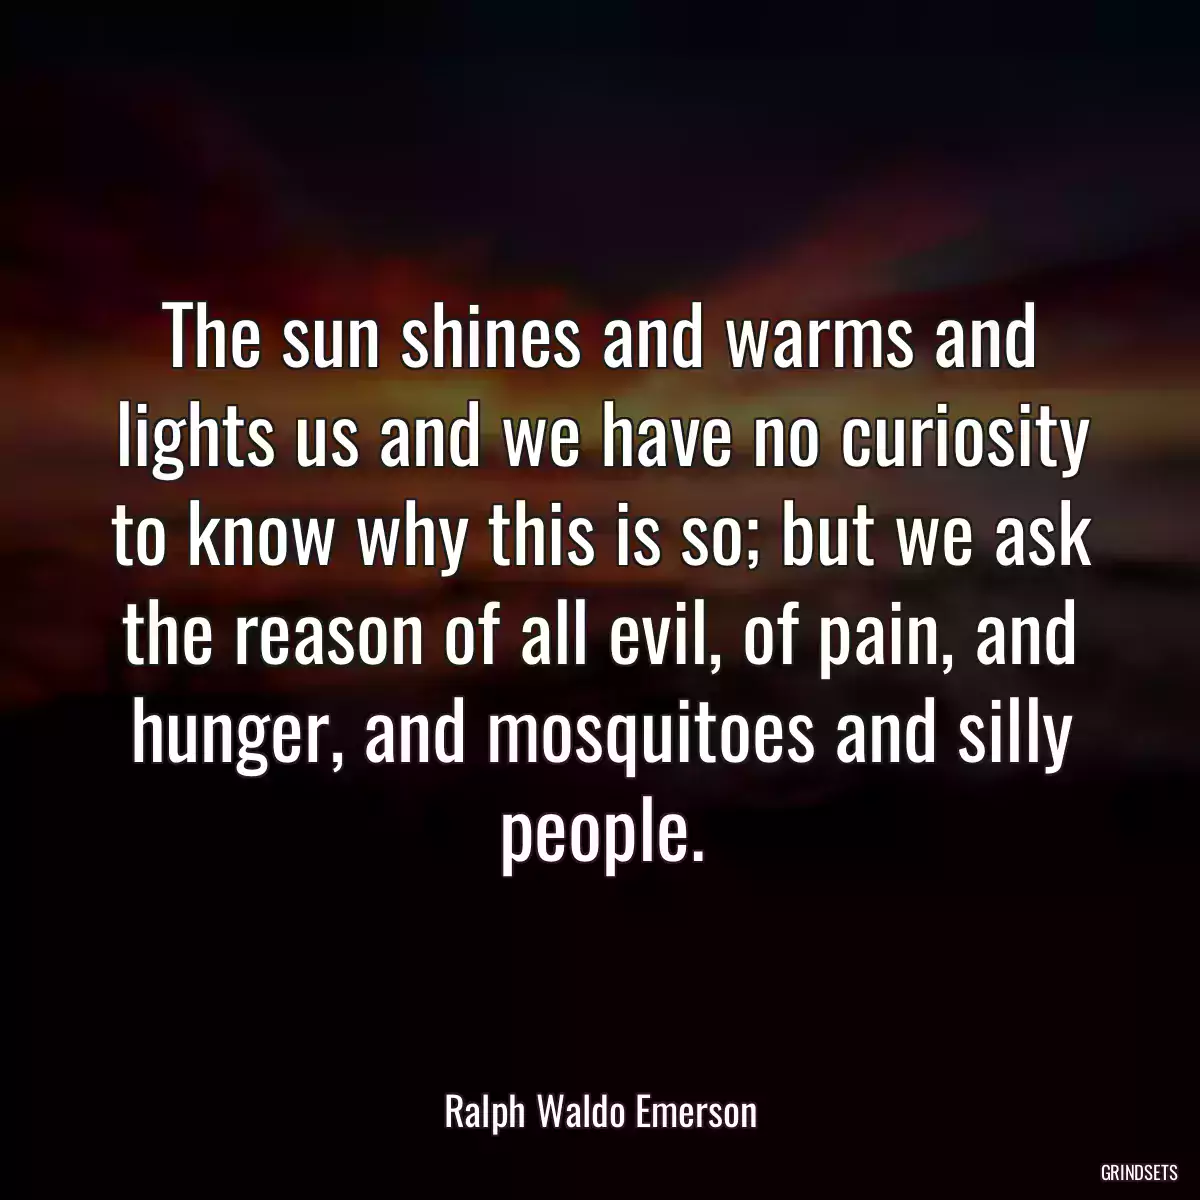 The sun shines and warms and lights us and we have no curiosity to know why this is so; but we ask the reason of all evil, of pain, and hunger, and mosquitoes and silly people.